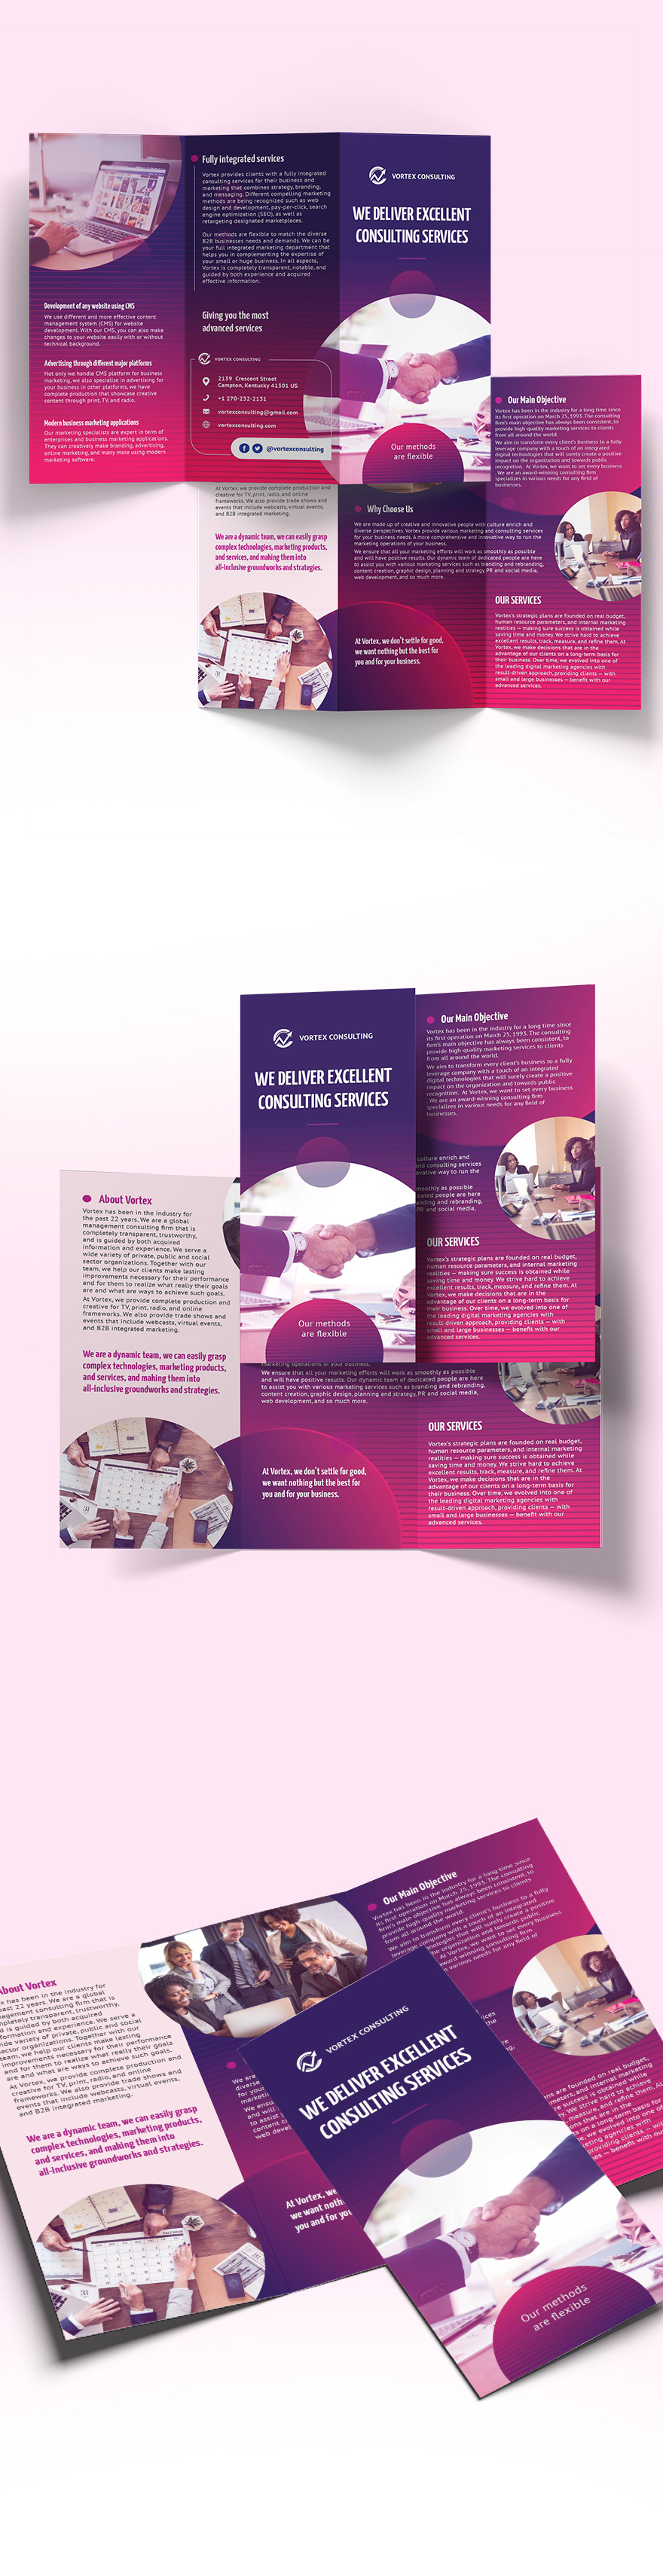 Consulting Services Tri-Fold Brochure Template